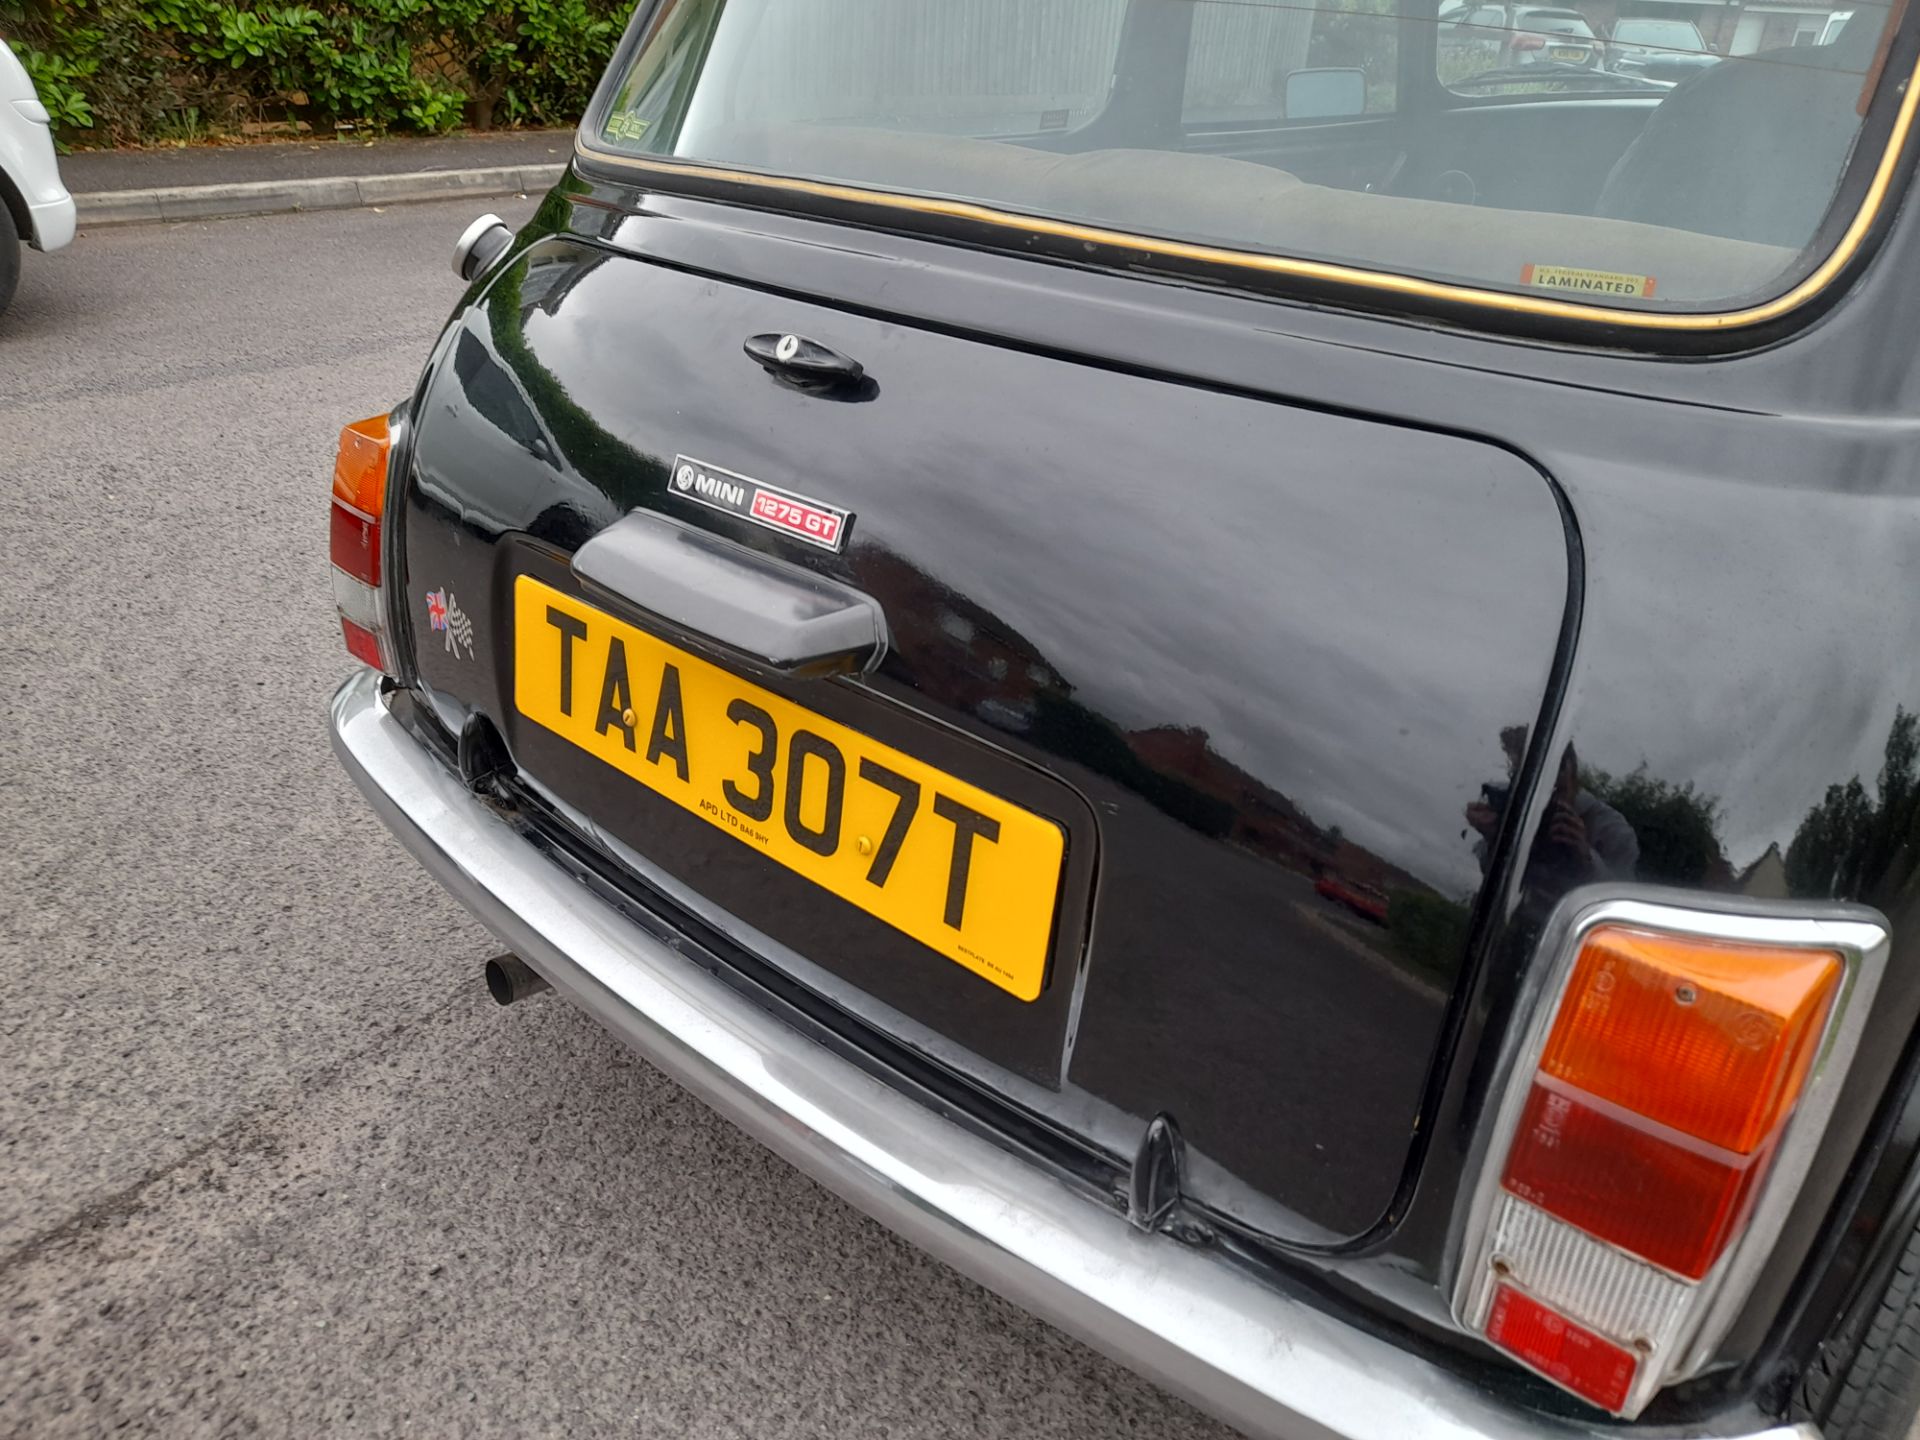 1979 Austin Morris Mini Clubman Registration number TAA 307T Badged as a 1275 GT New sills and cones - Image 16 of 25